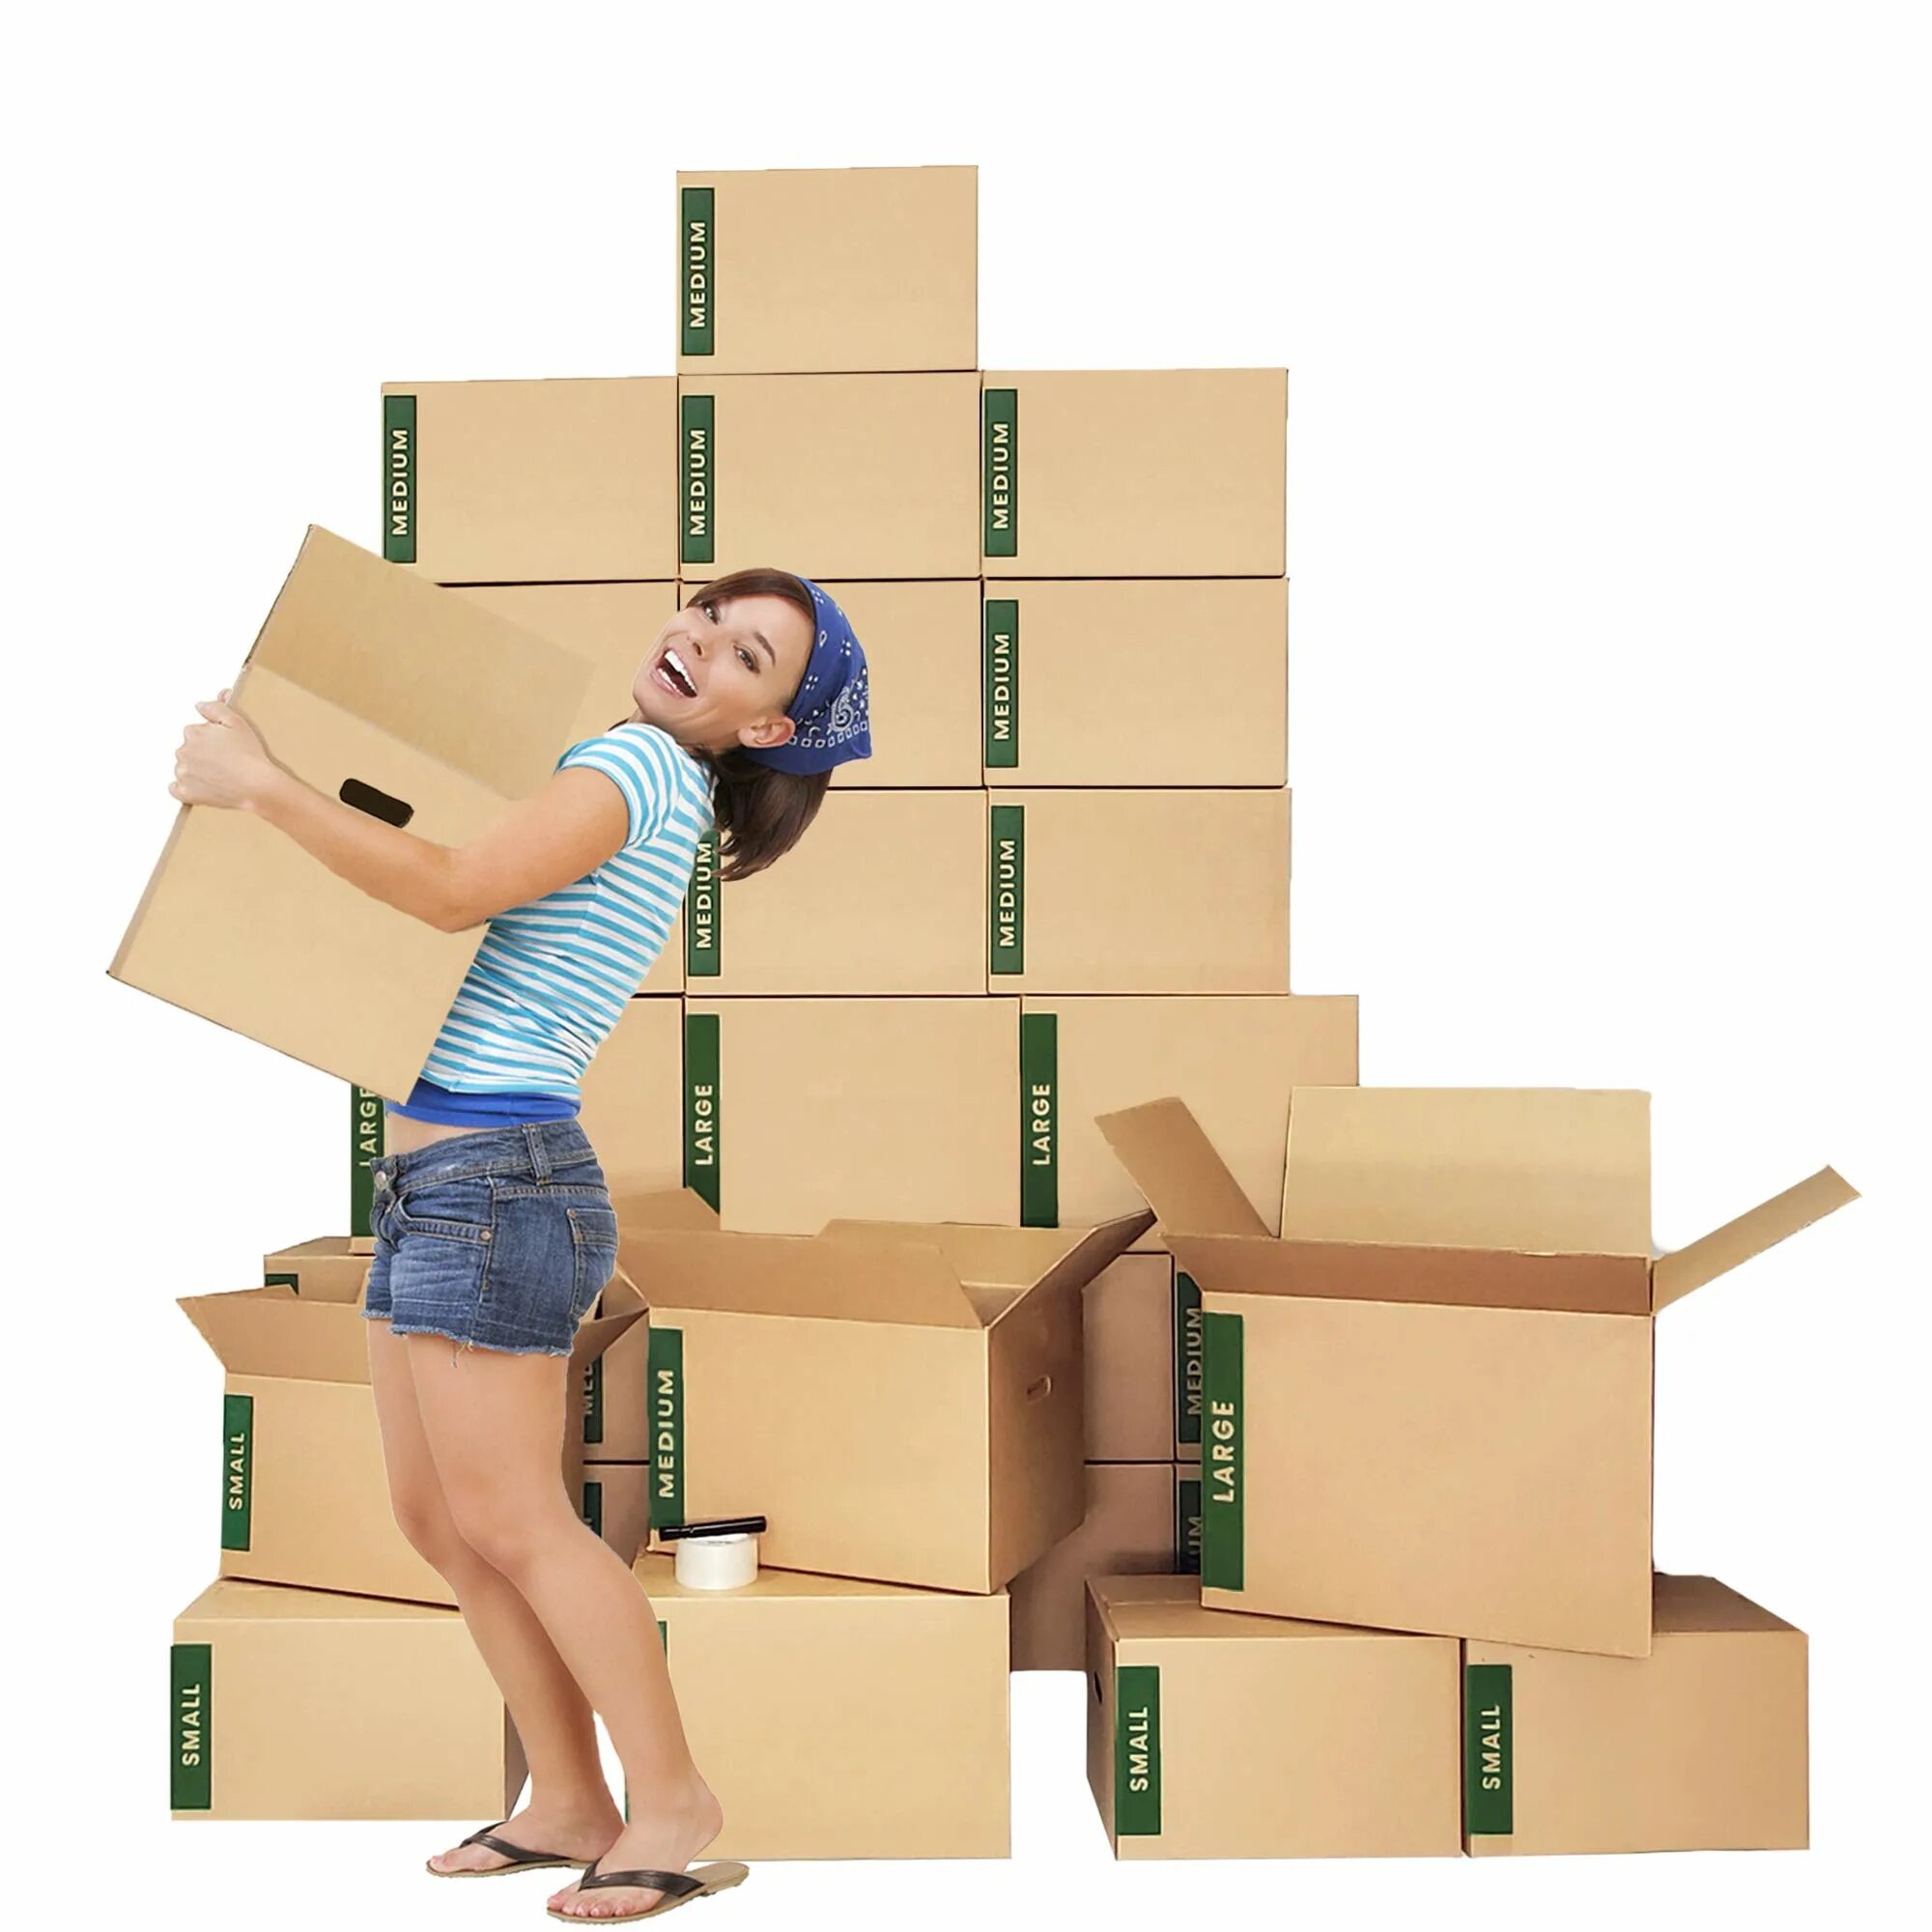 Moving Boxes. Moving Boxes игра. Shipping Box. Buying Packing Boxes.